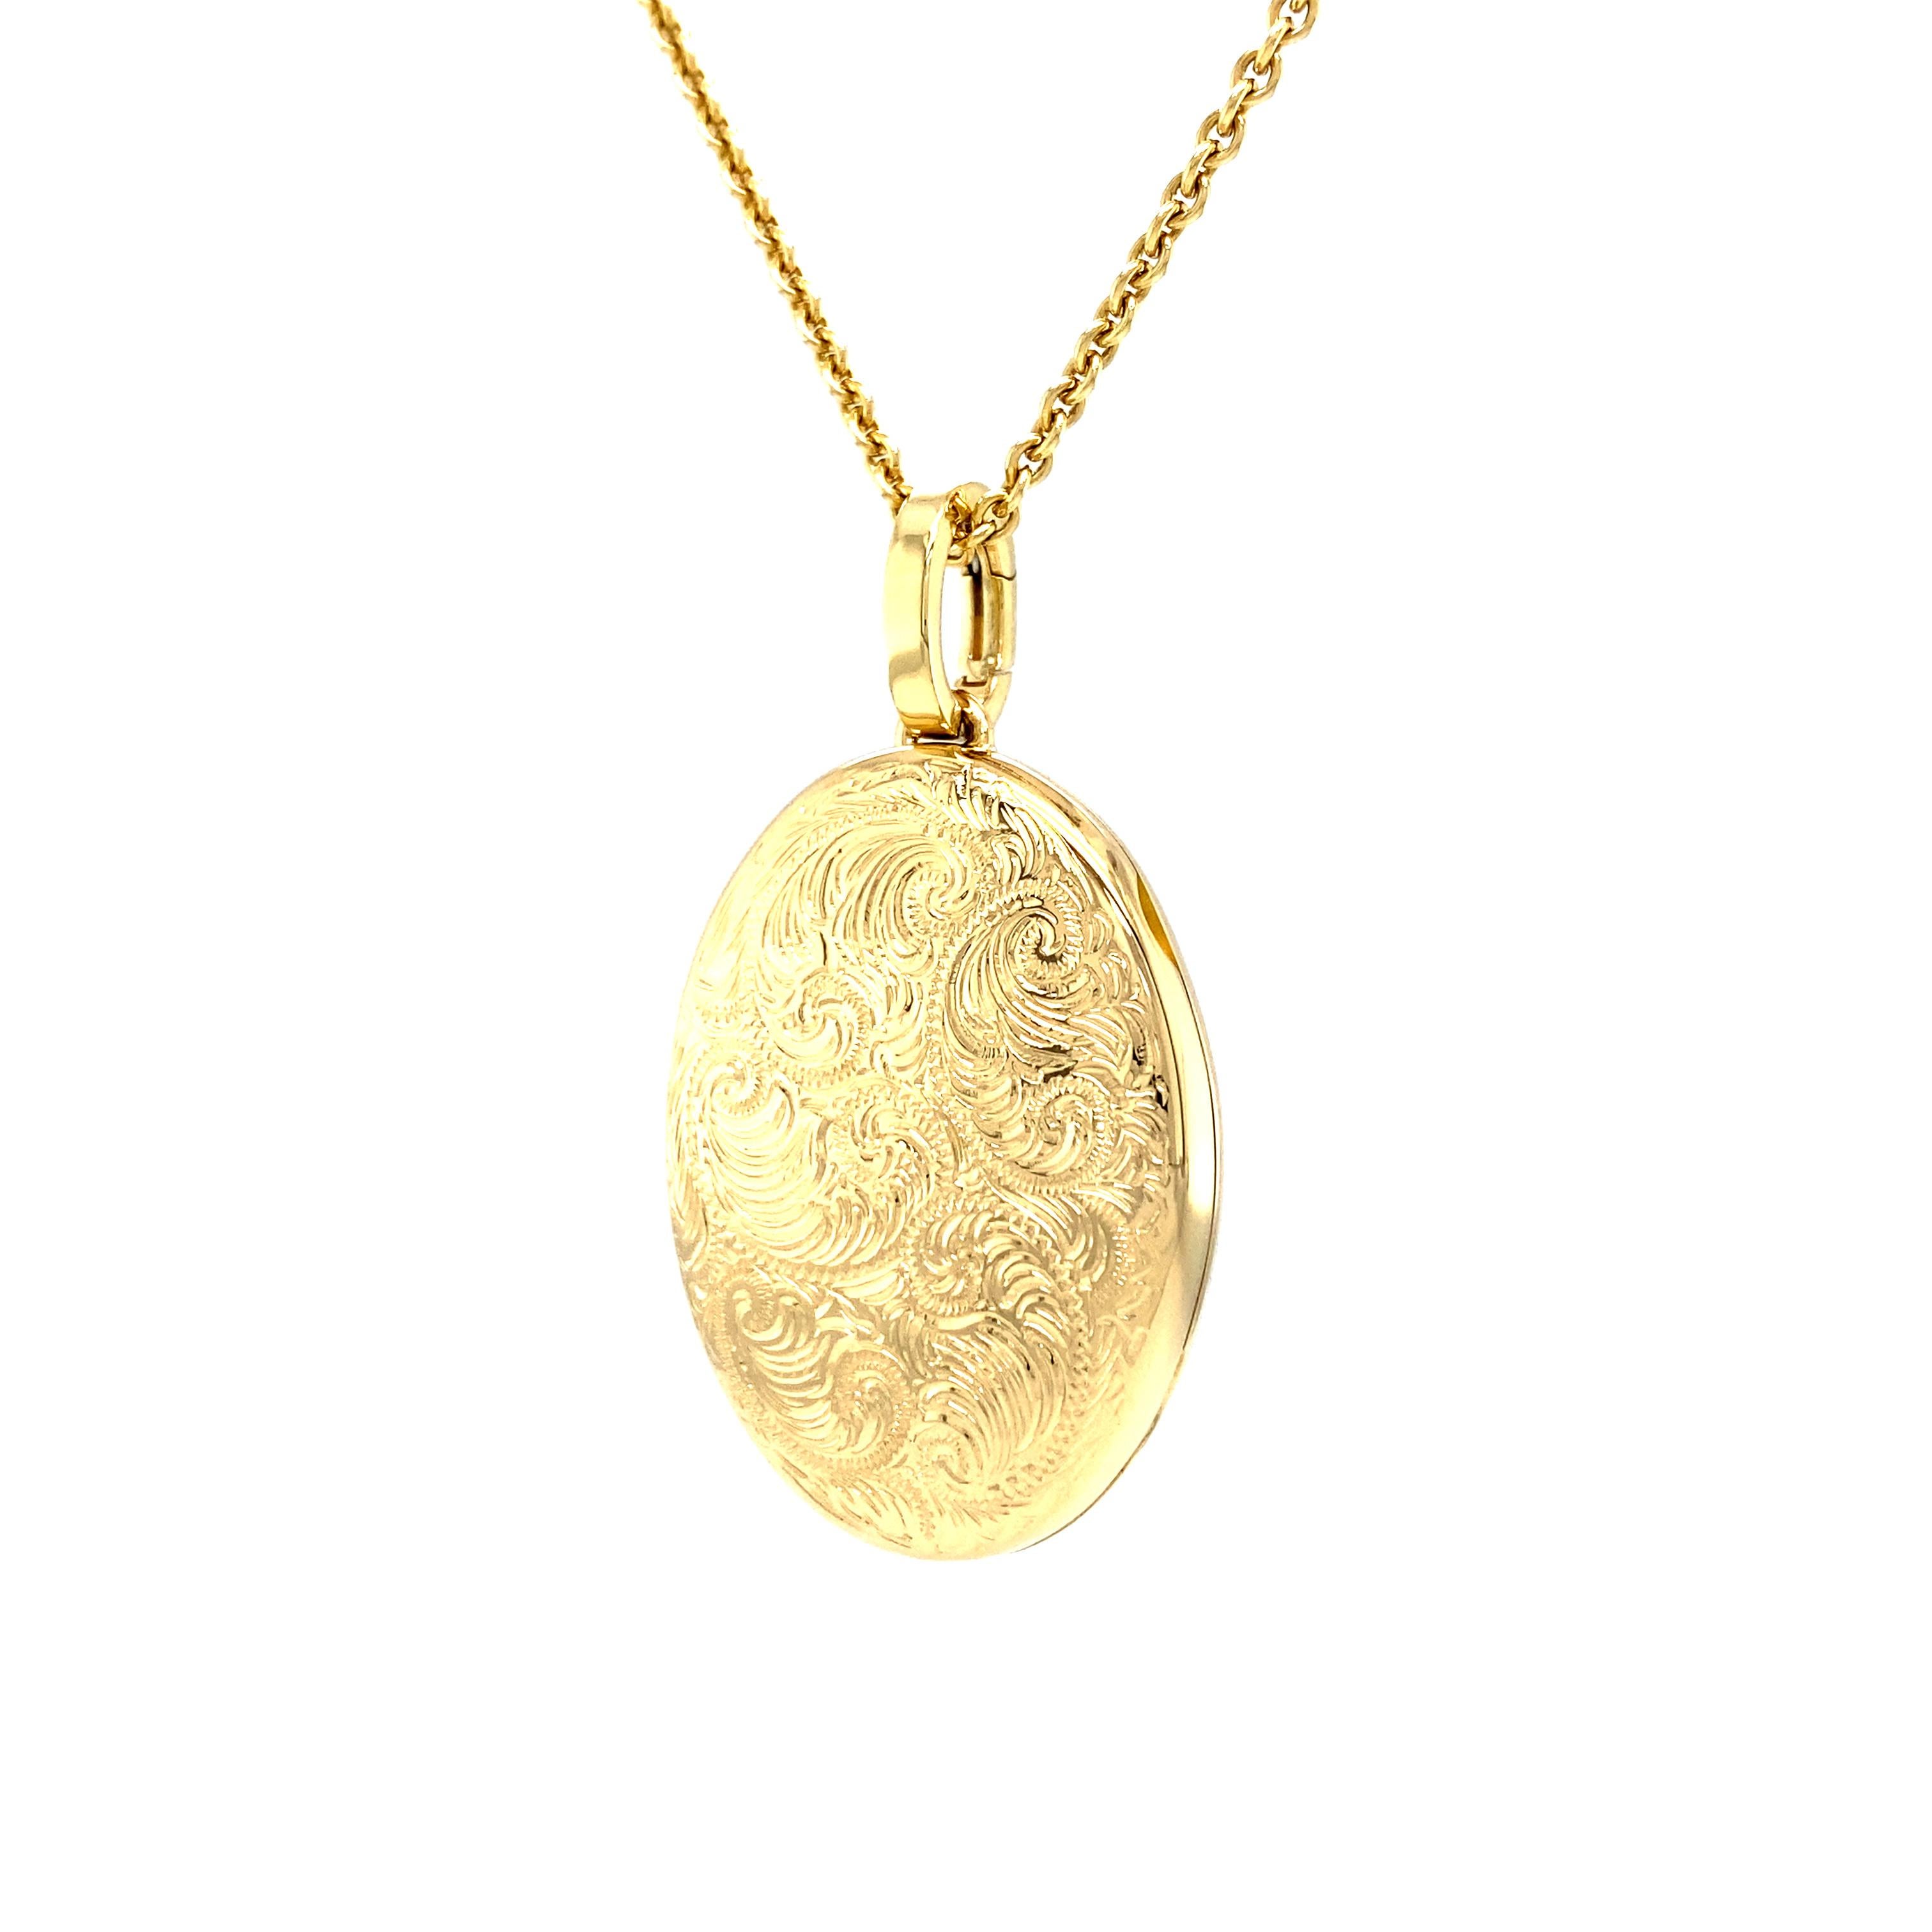 Oval Locket Pendant with Scroll Engraving - 18k Yellow Gold - 32.0 x 23.0 mm For Sale 4